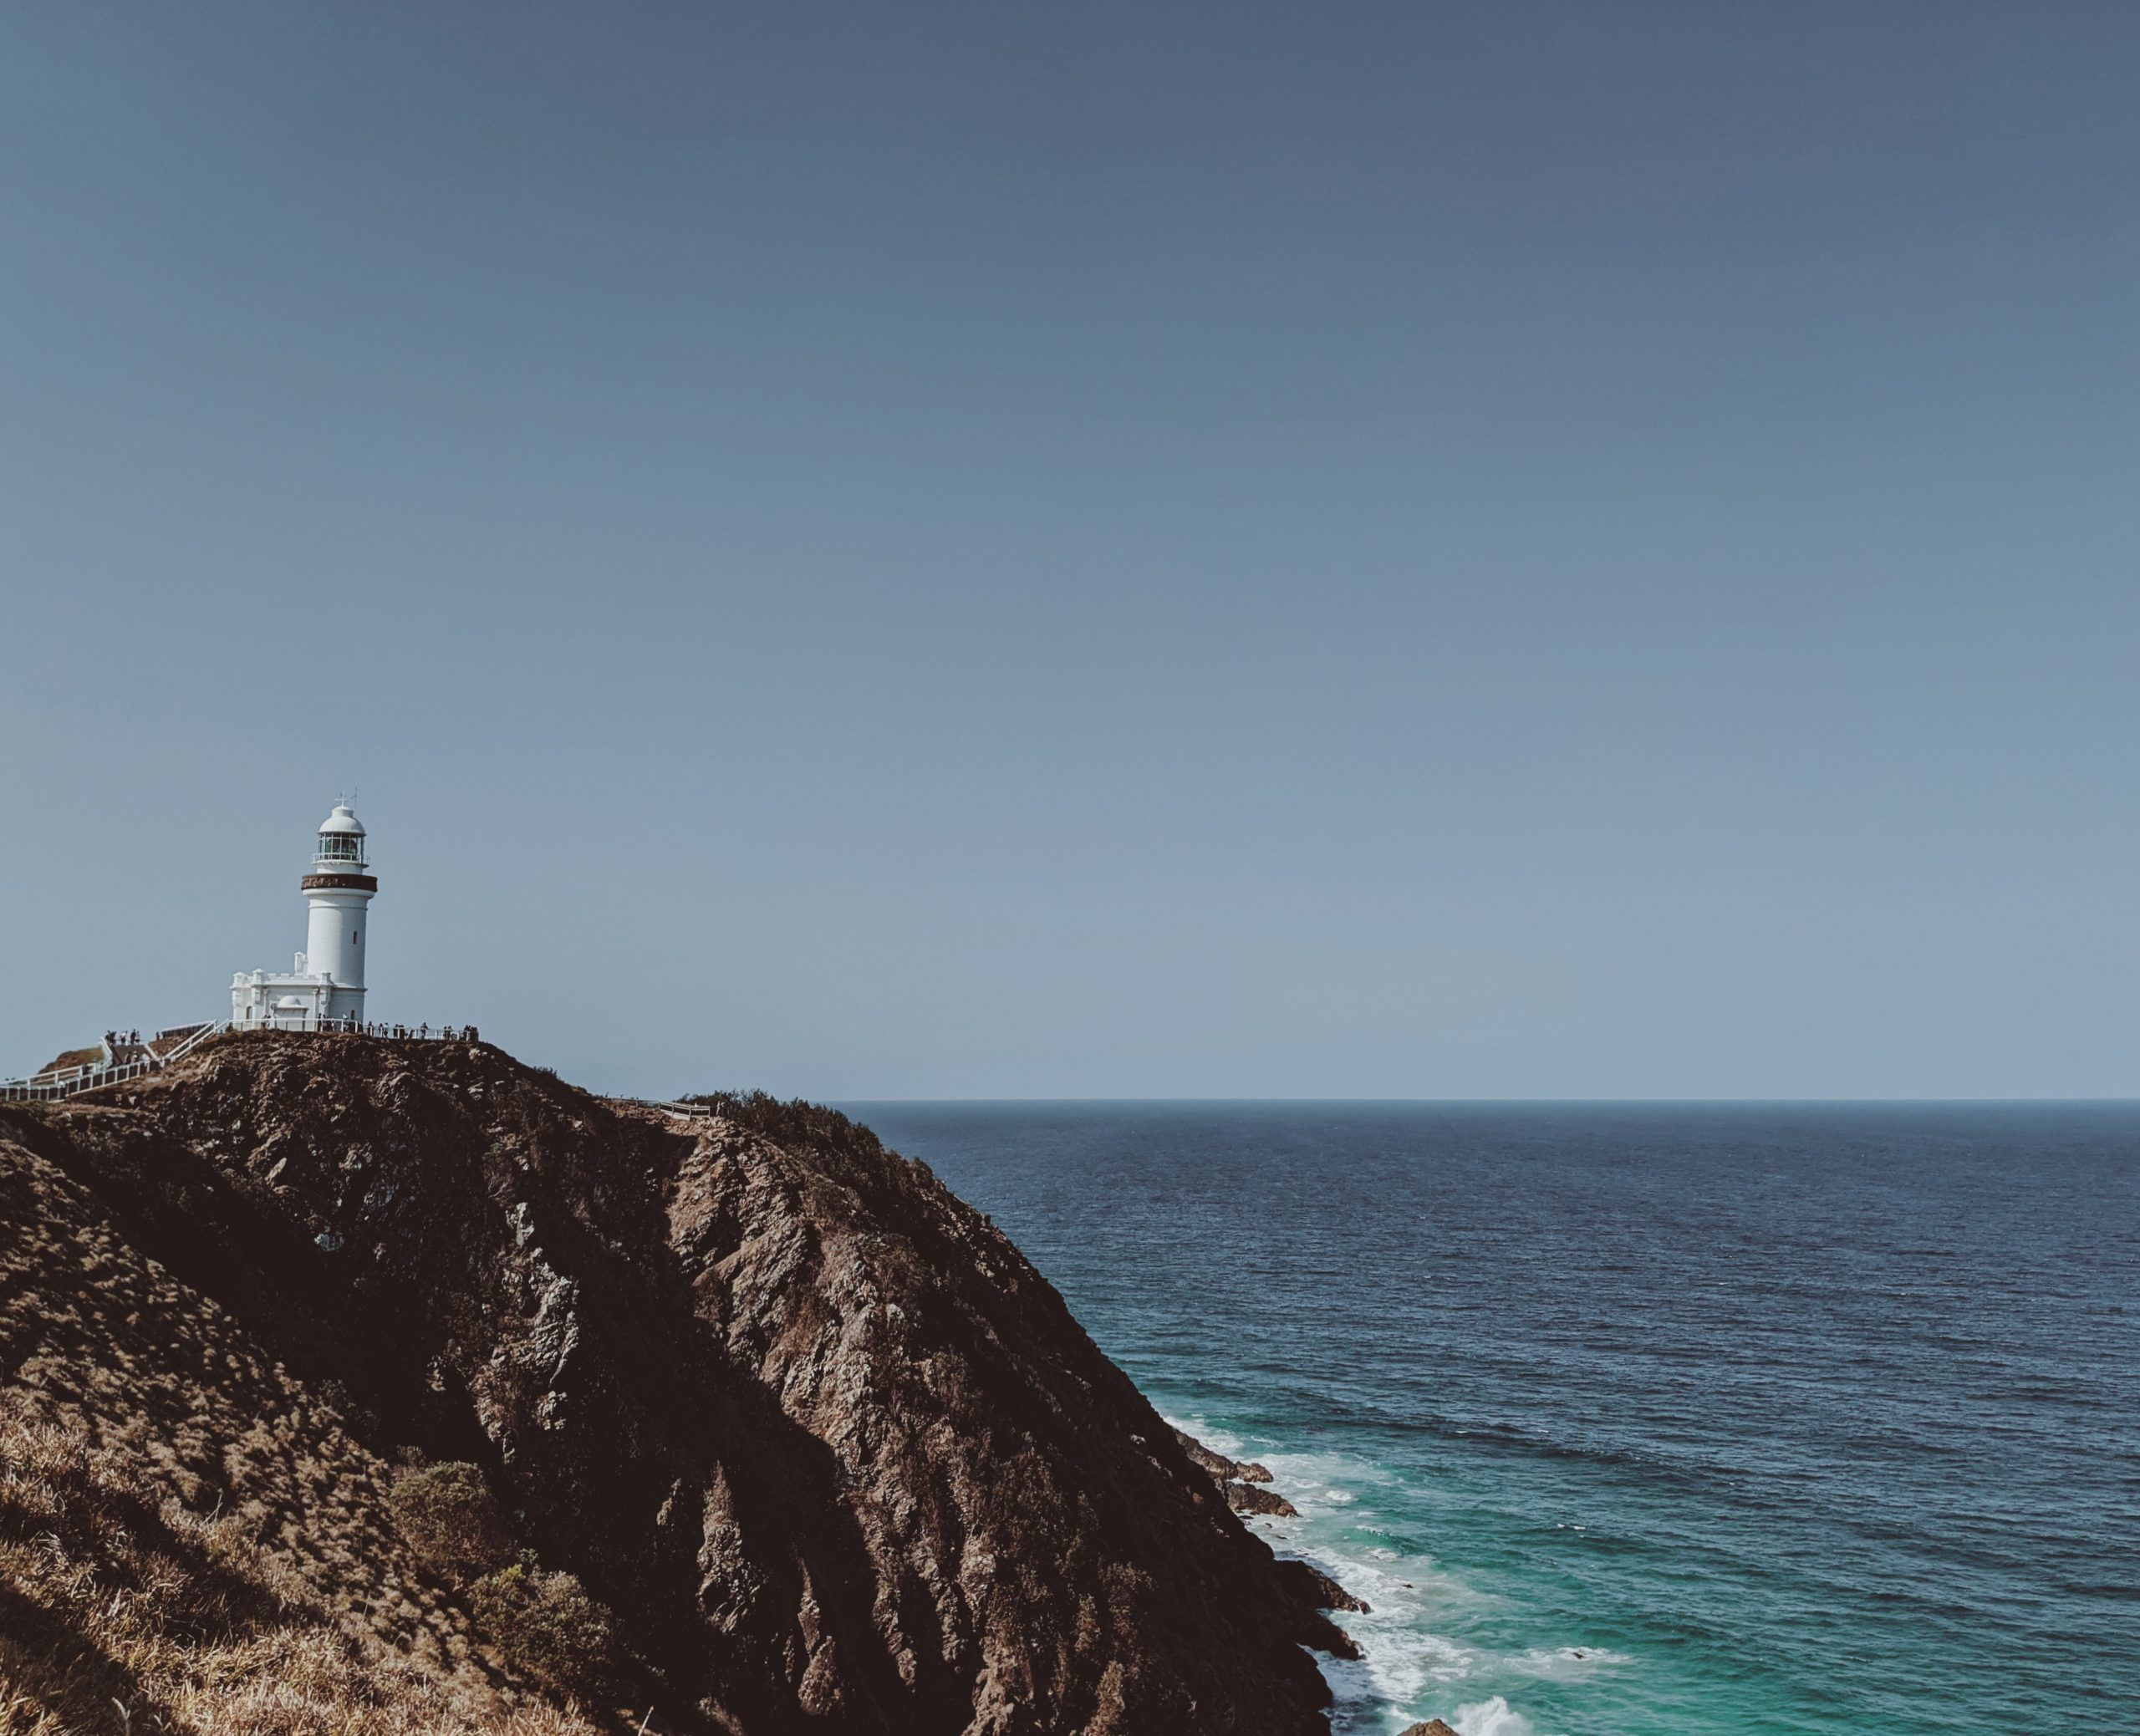 The Byron Lighthouse is one of our top recommendations for things to do in Byron Bay this winter